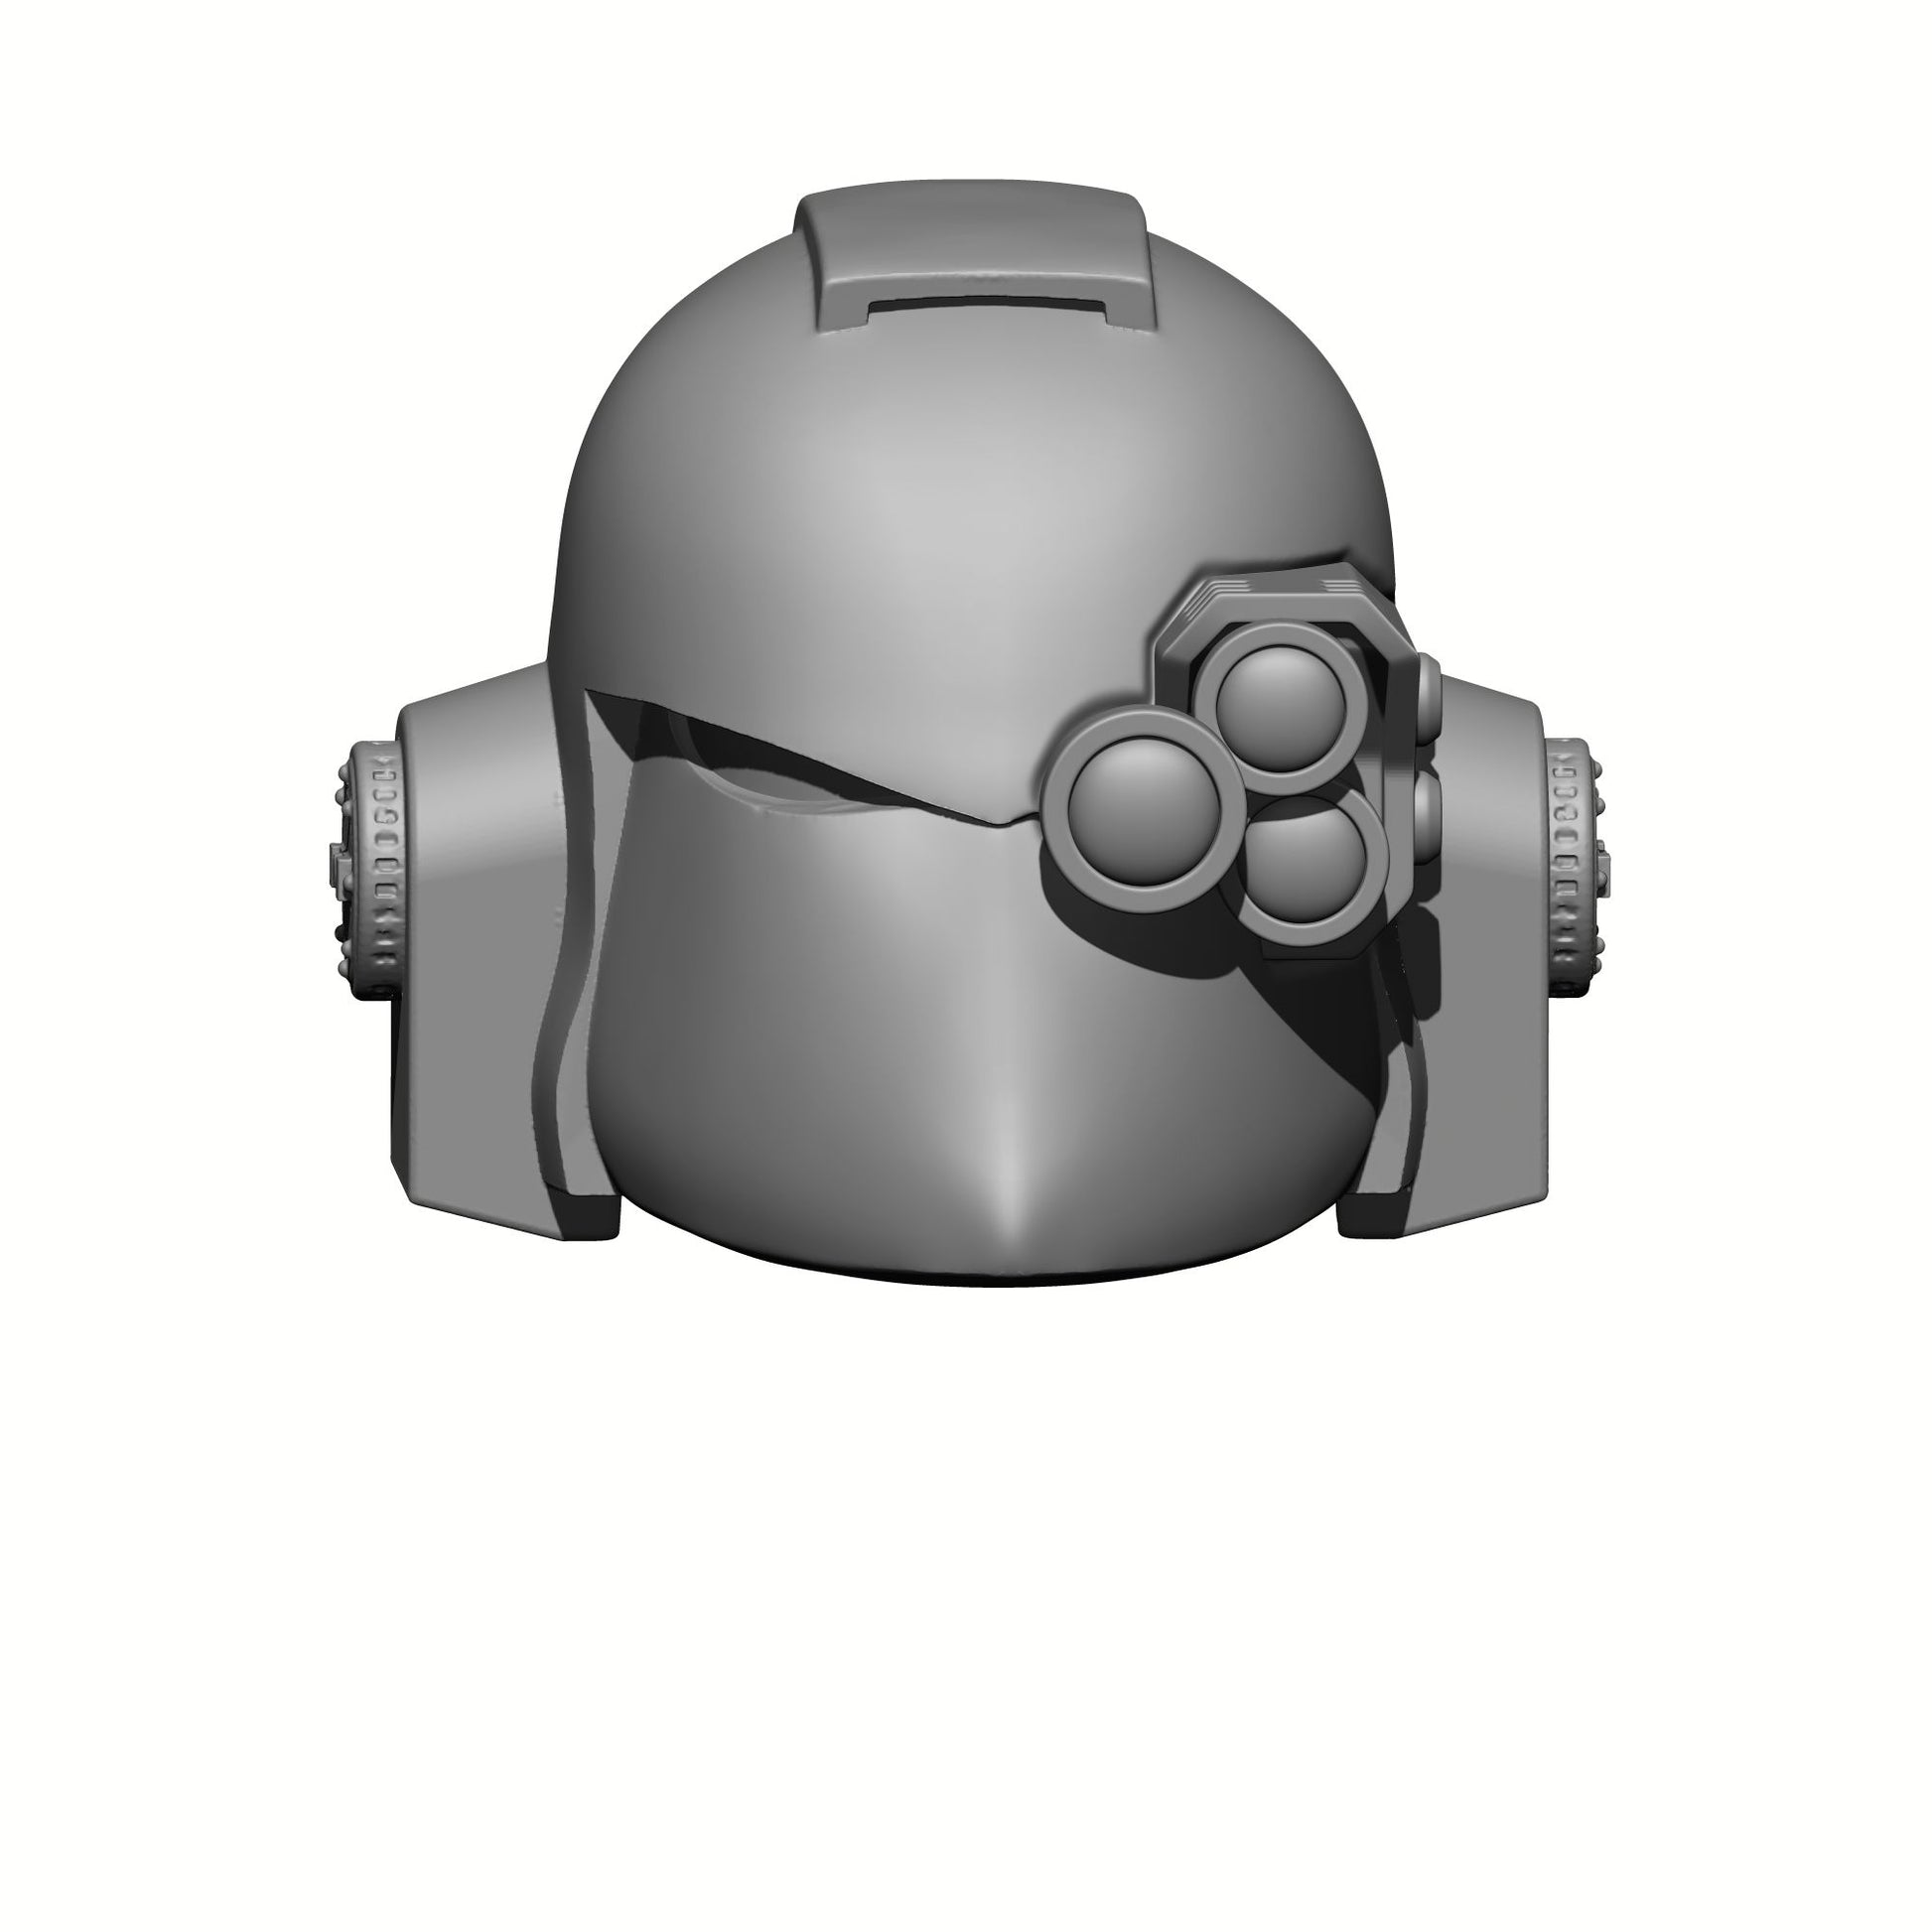 Techmarine Mark VI Helmet with Optics Compatible with McFarlane Toys Space Marine Action Figures by Fantasy World Games